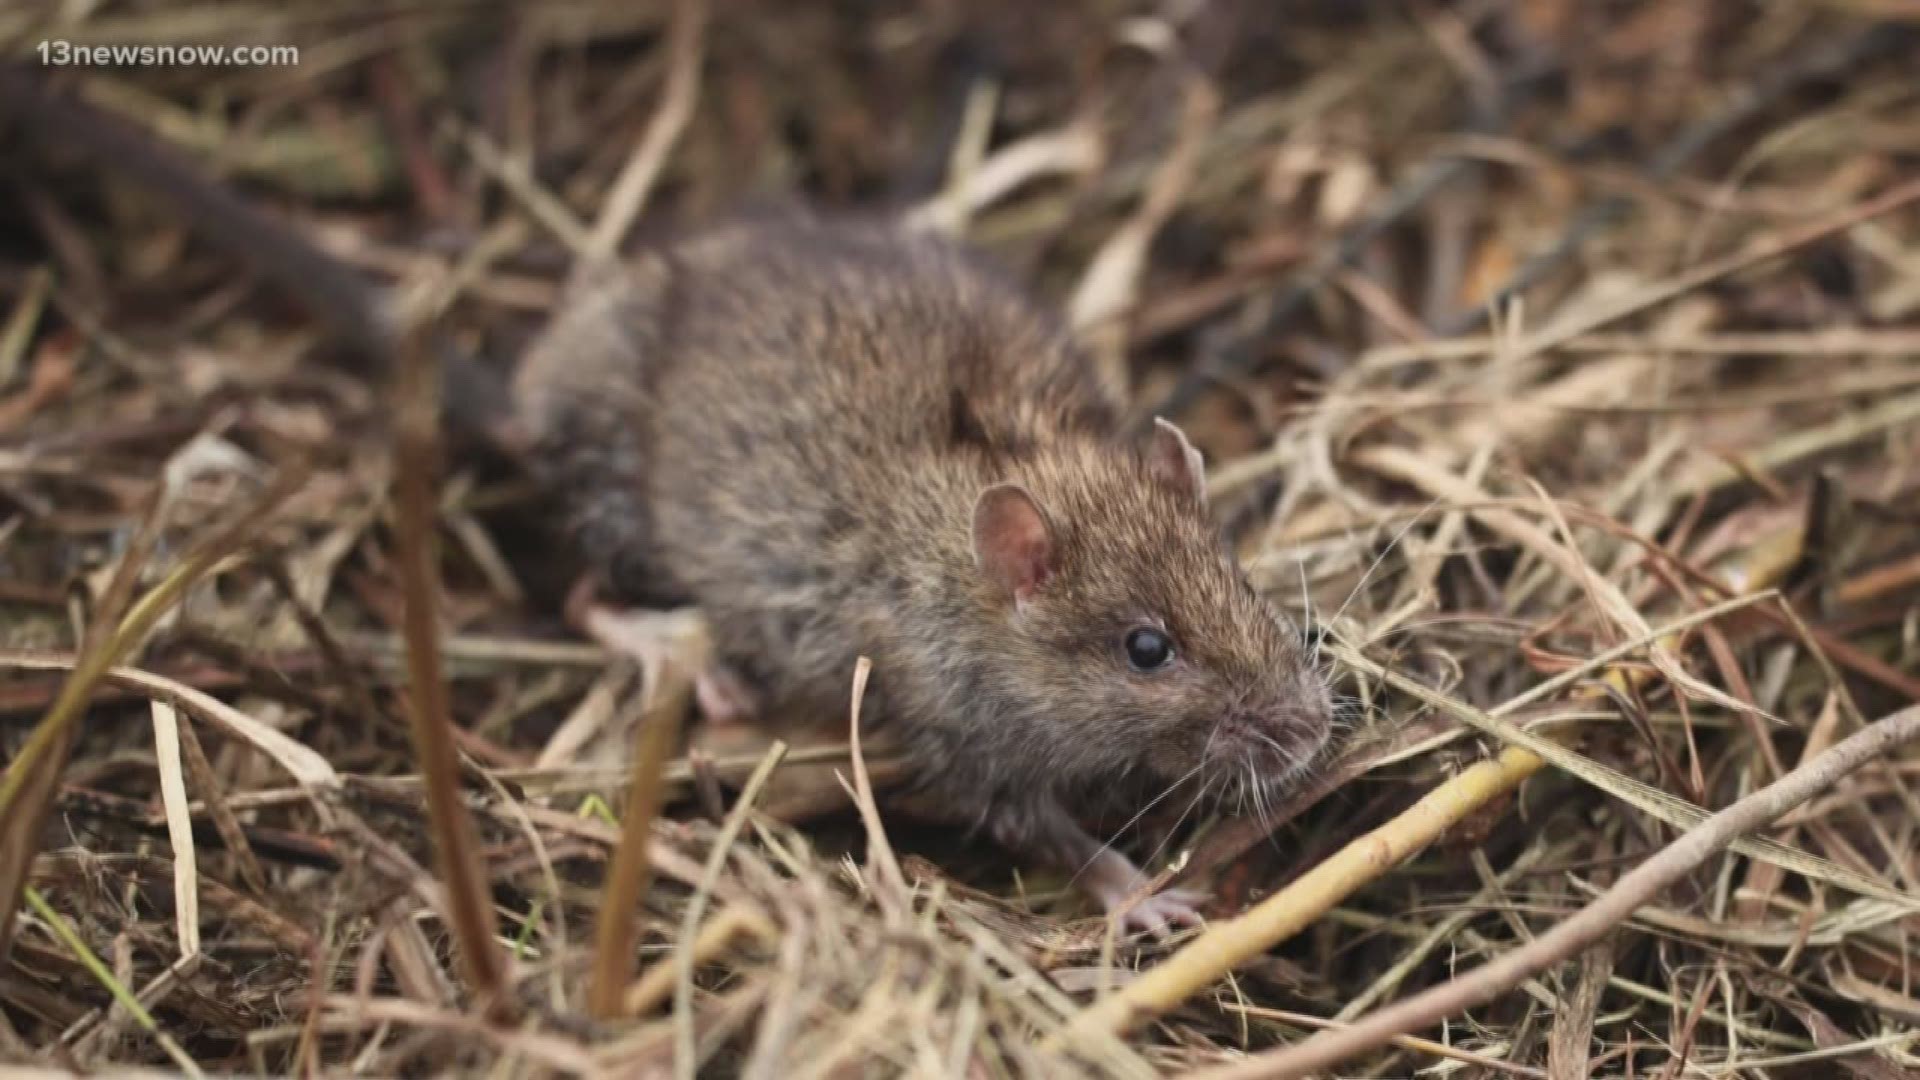 People in one Norfolk neighborhood are complaining about a rat problem that comes with the cooler weather. Here's what you need to know.